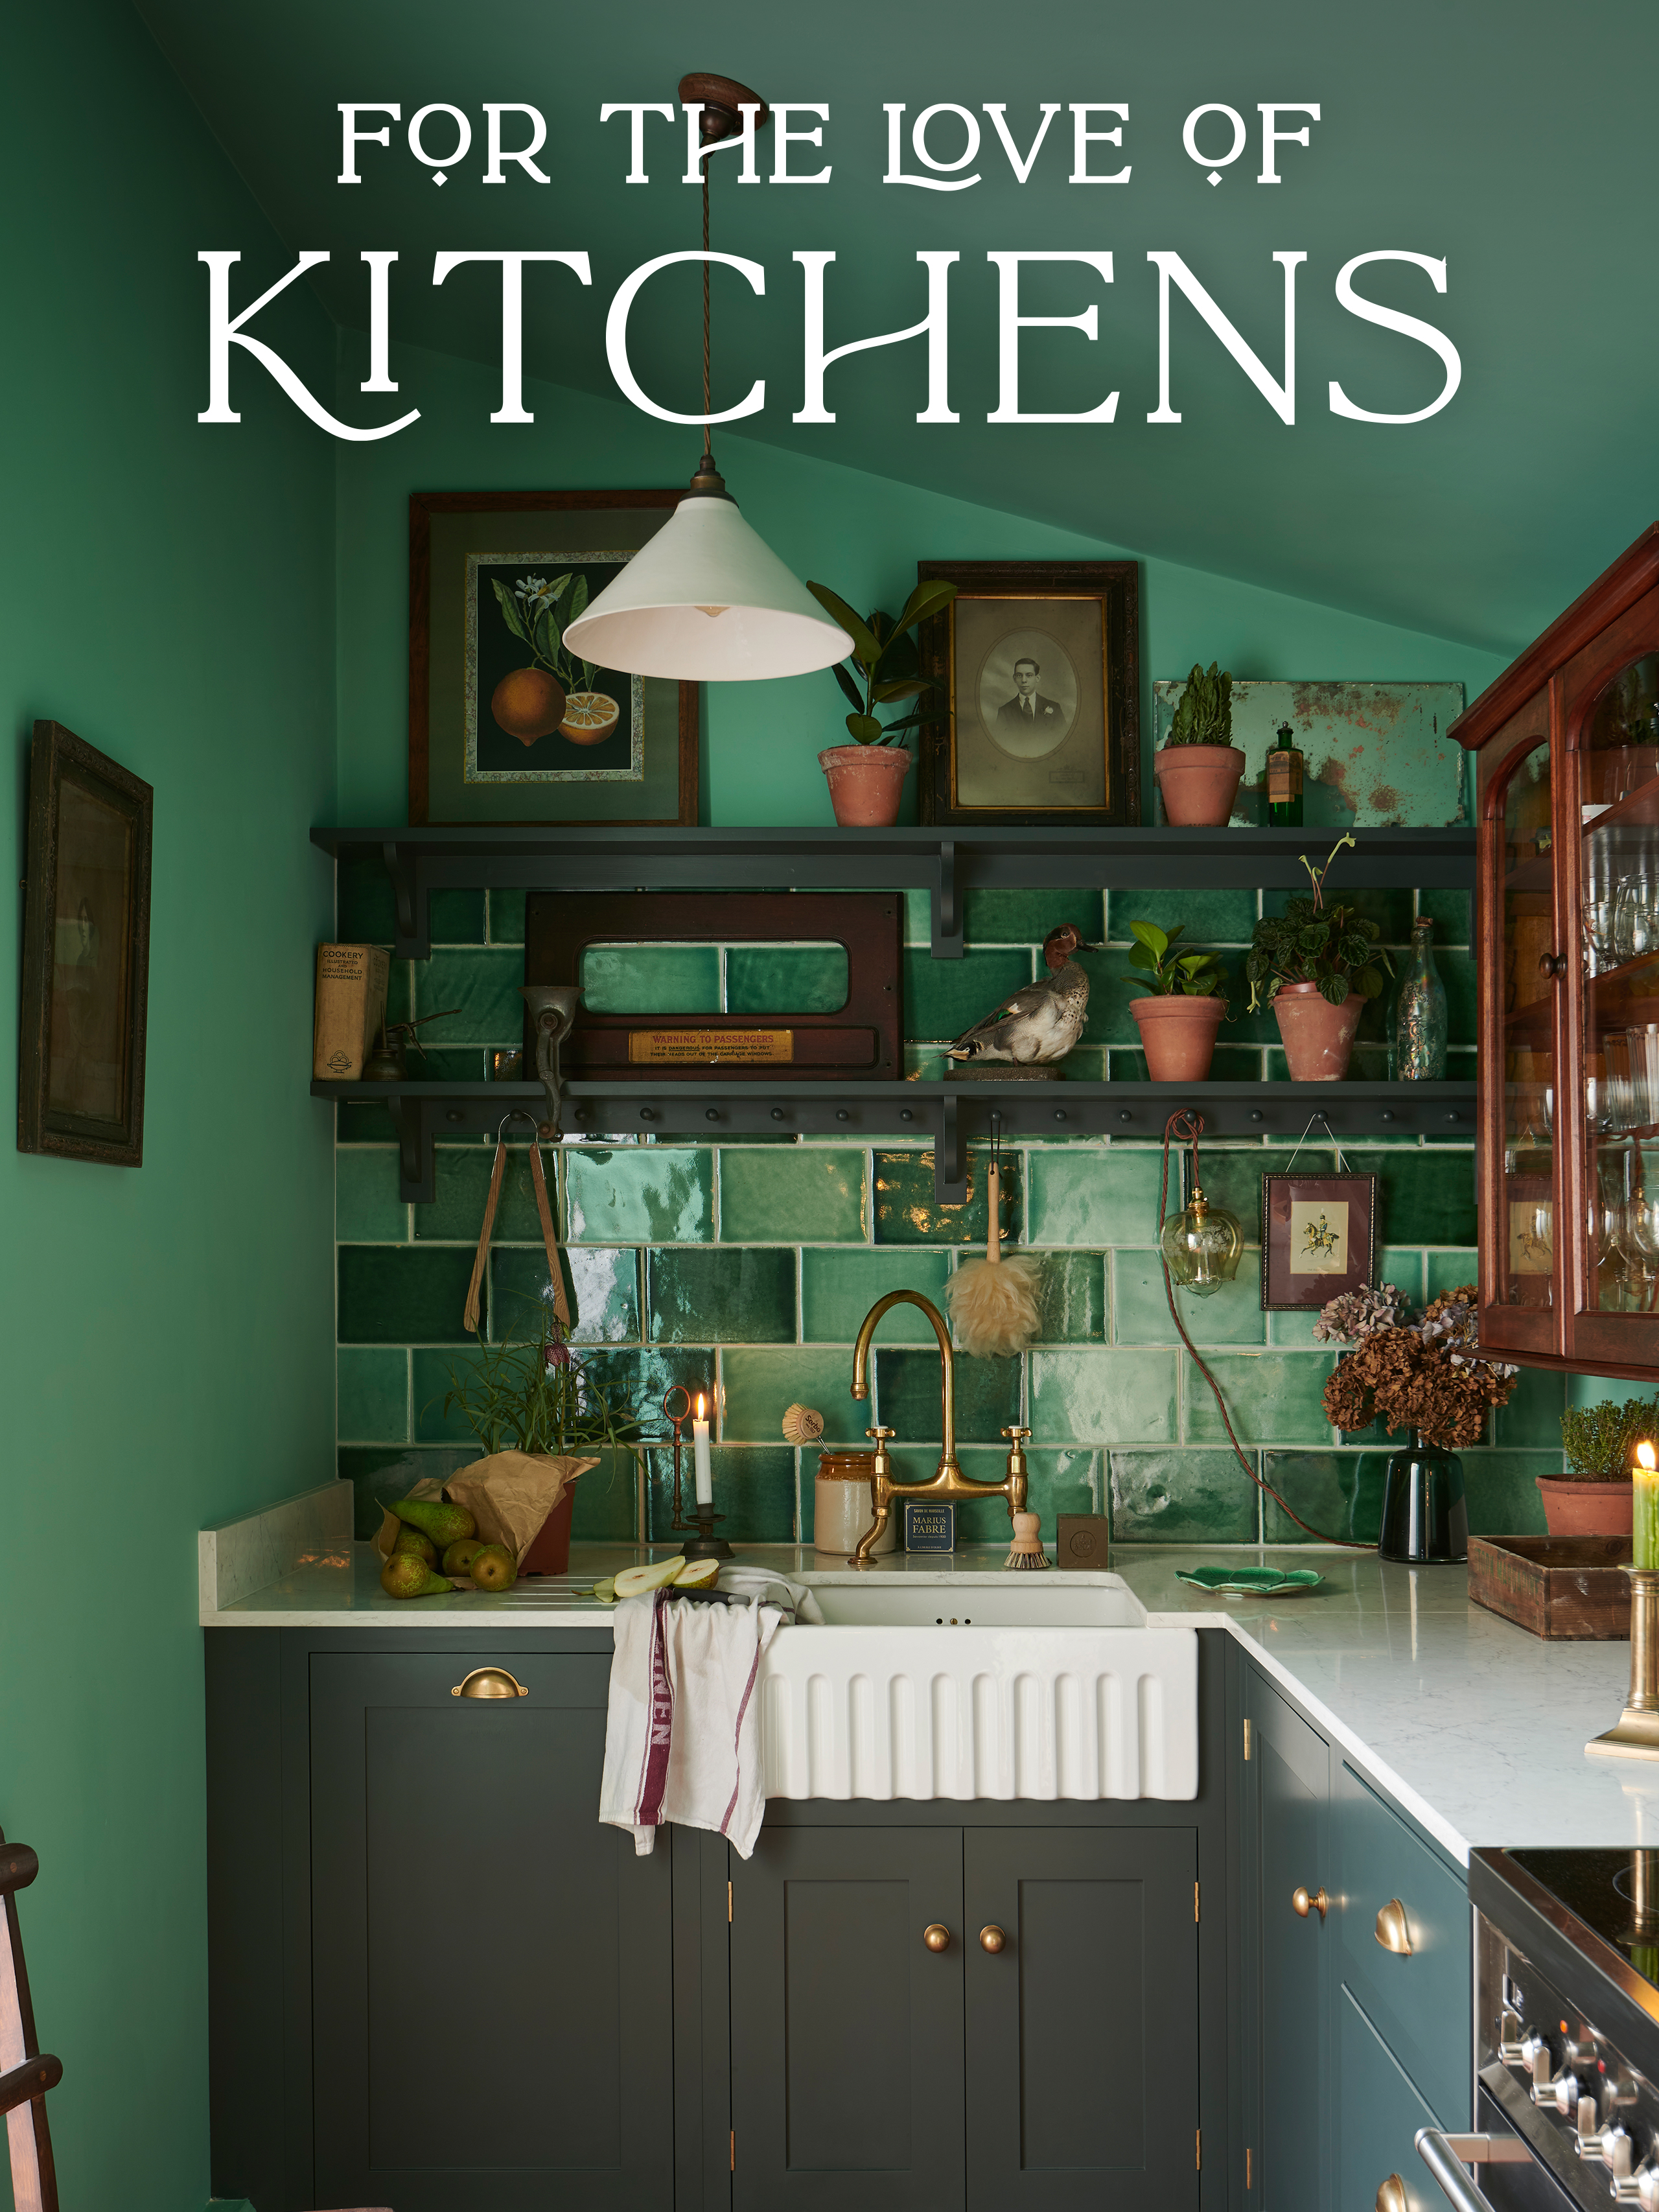 For The Love of Kitchens